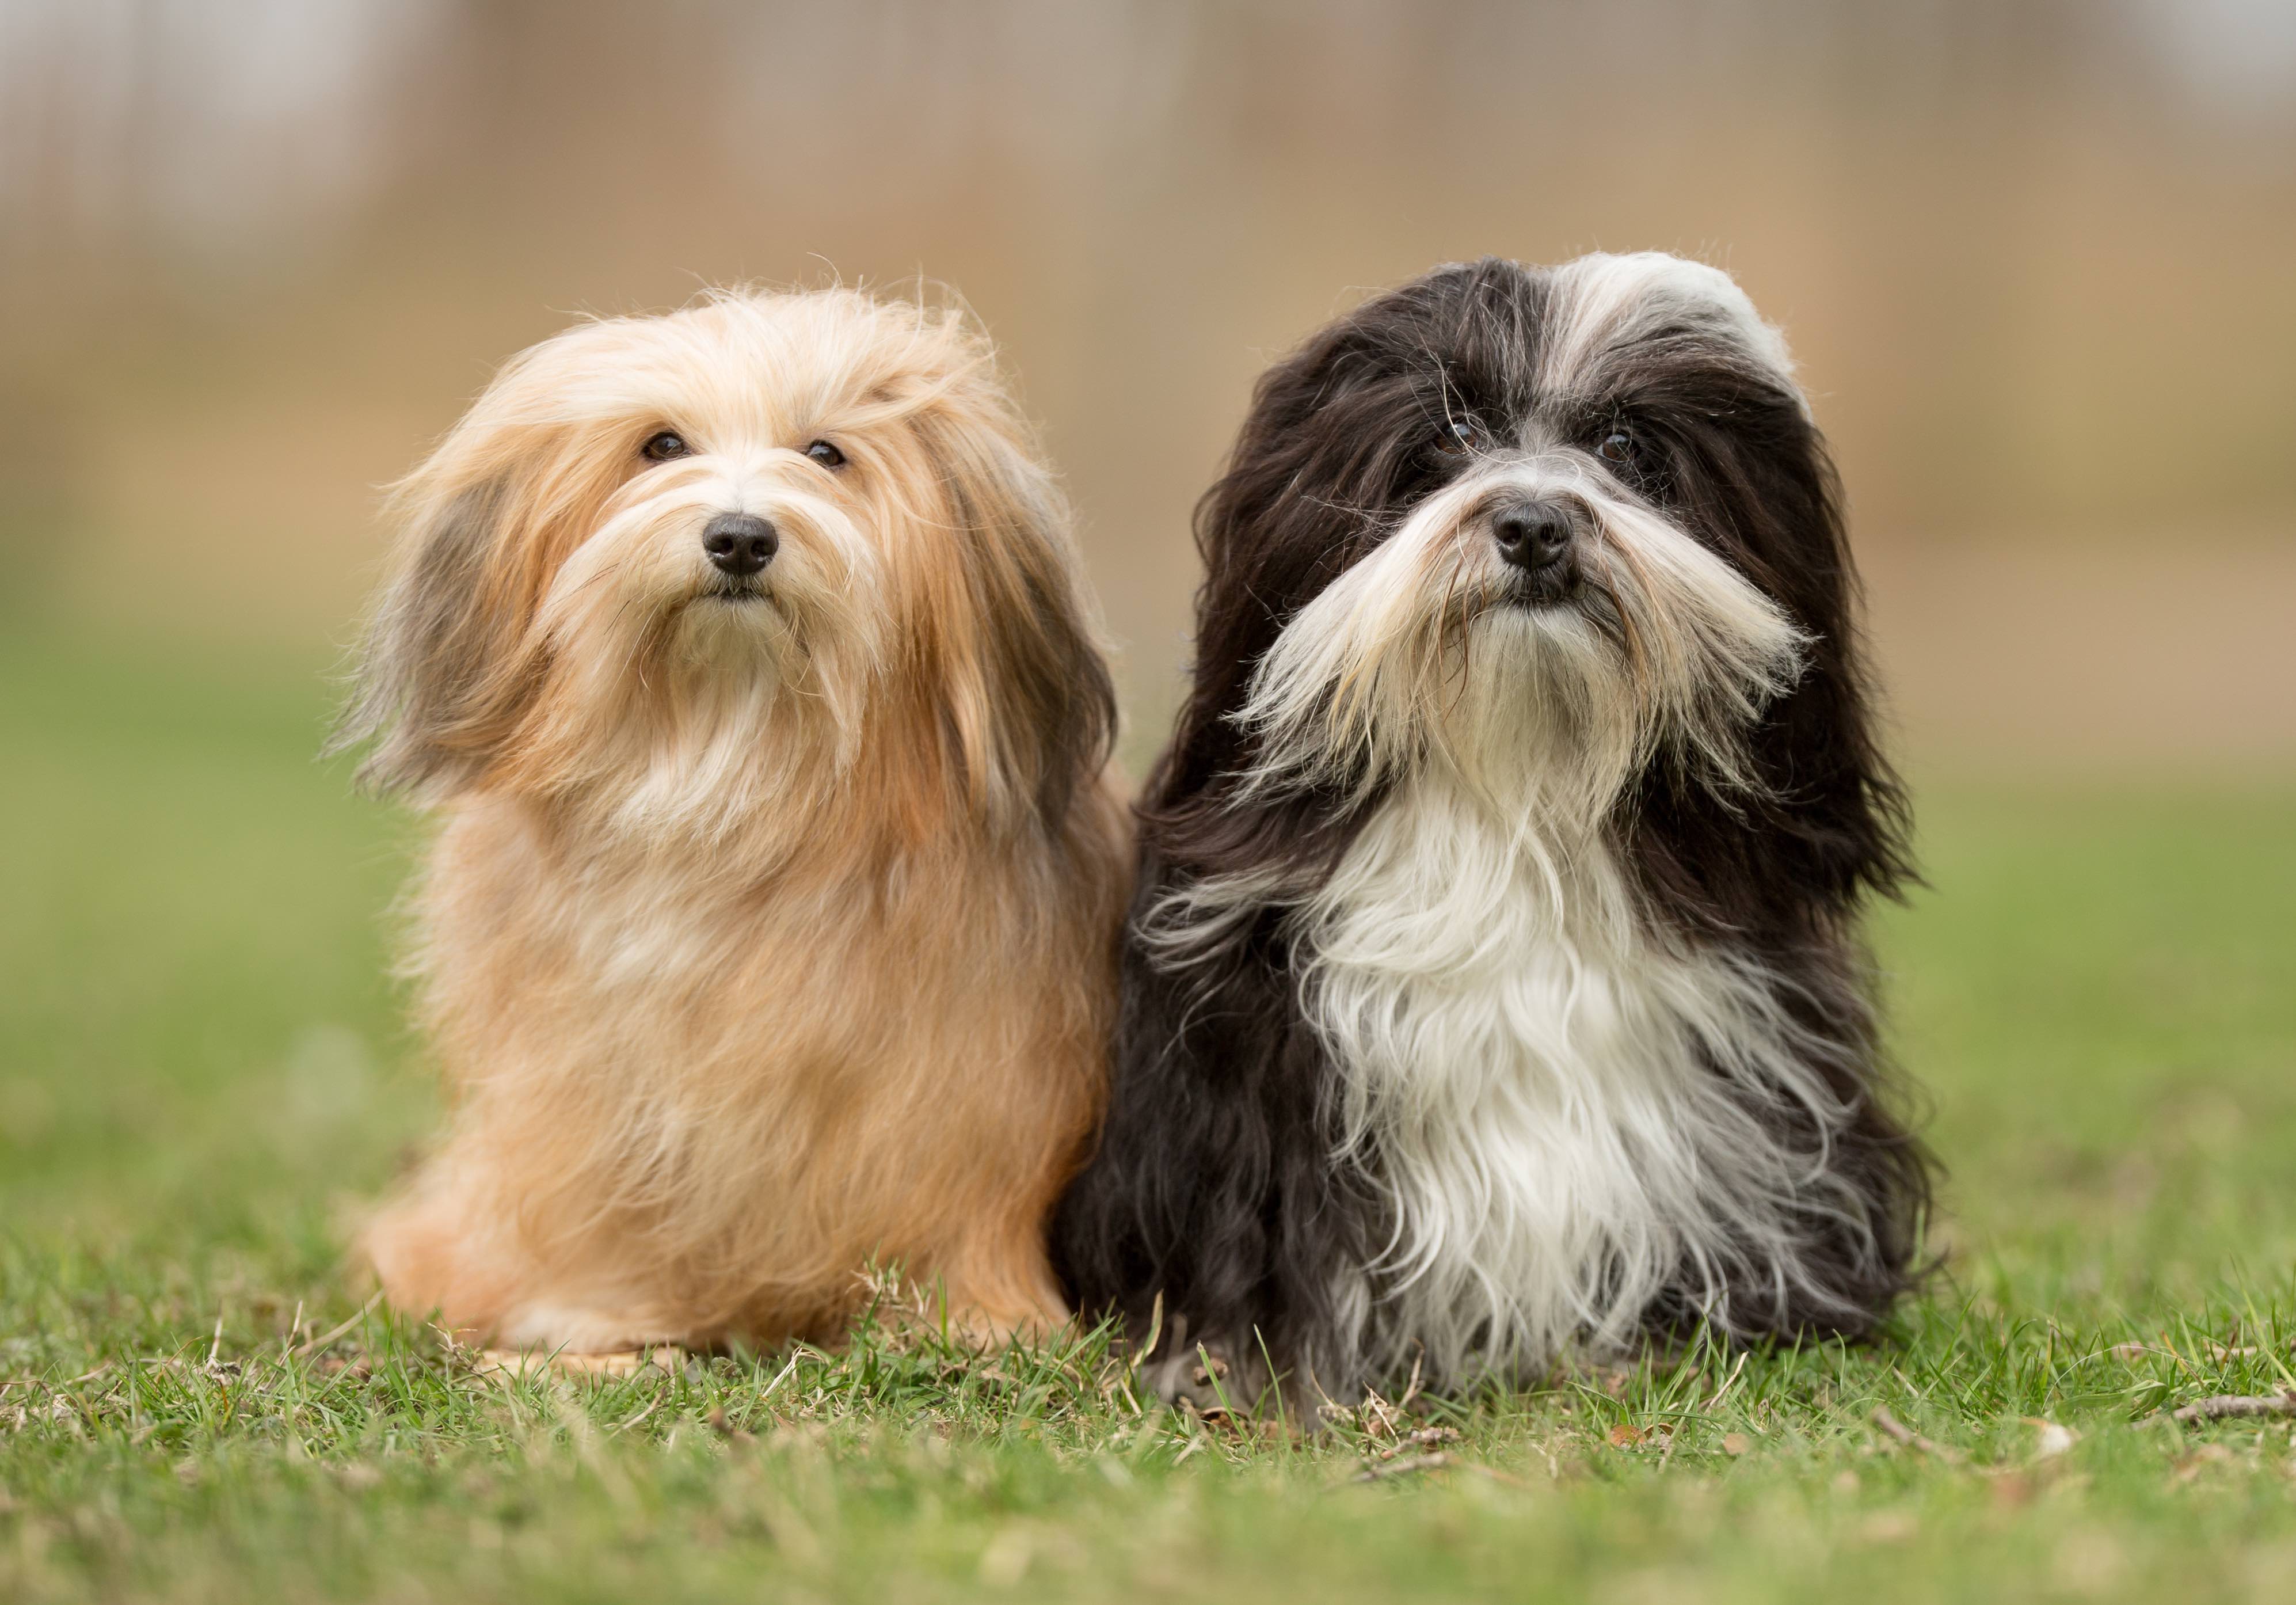 two havanese dogs sitting side by side in grass